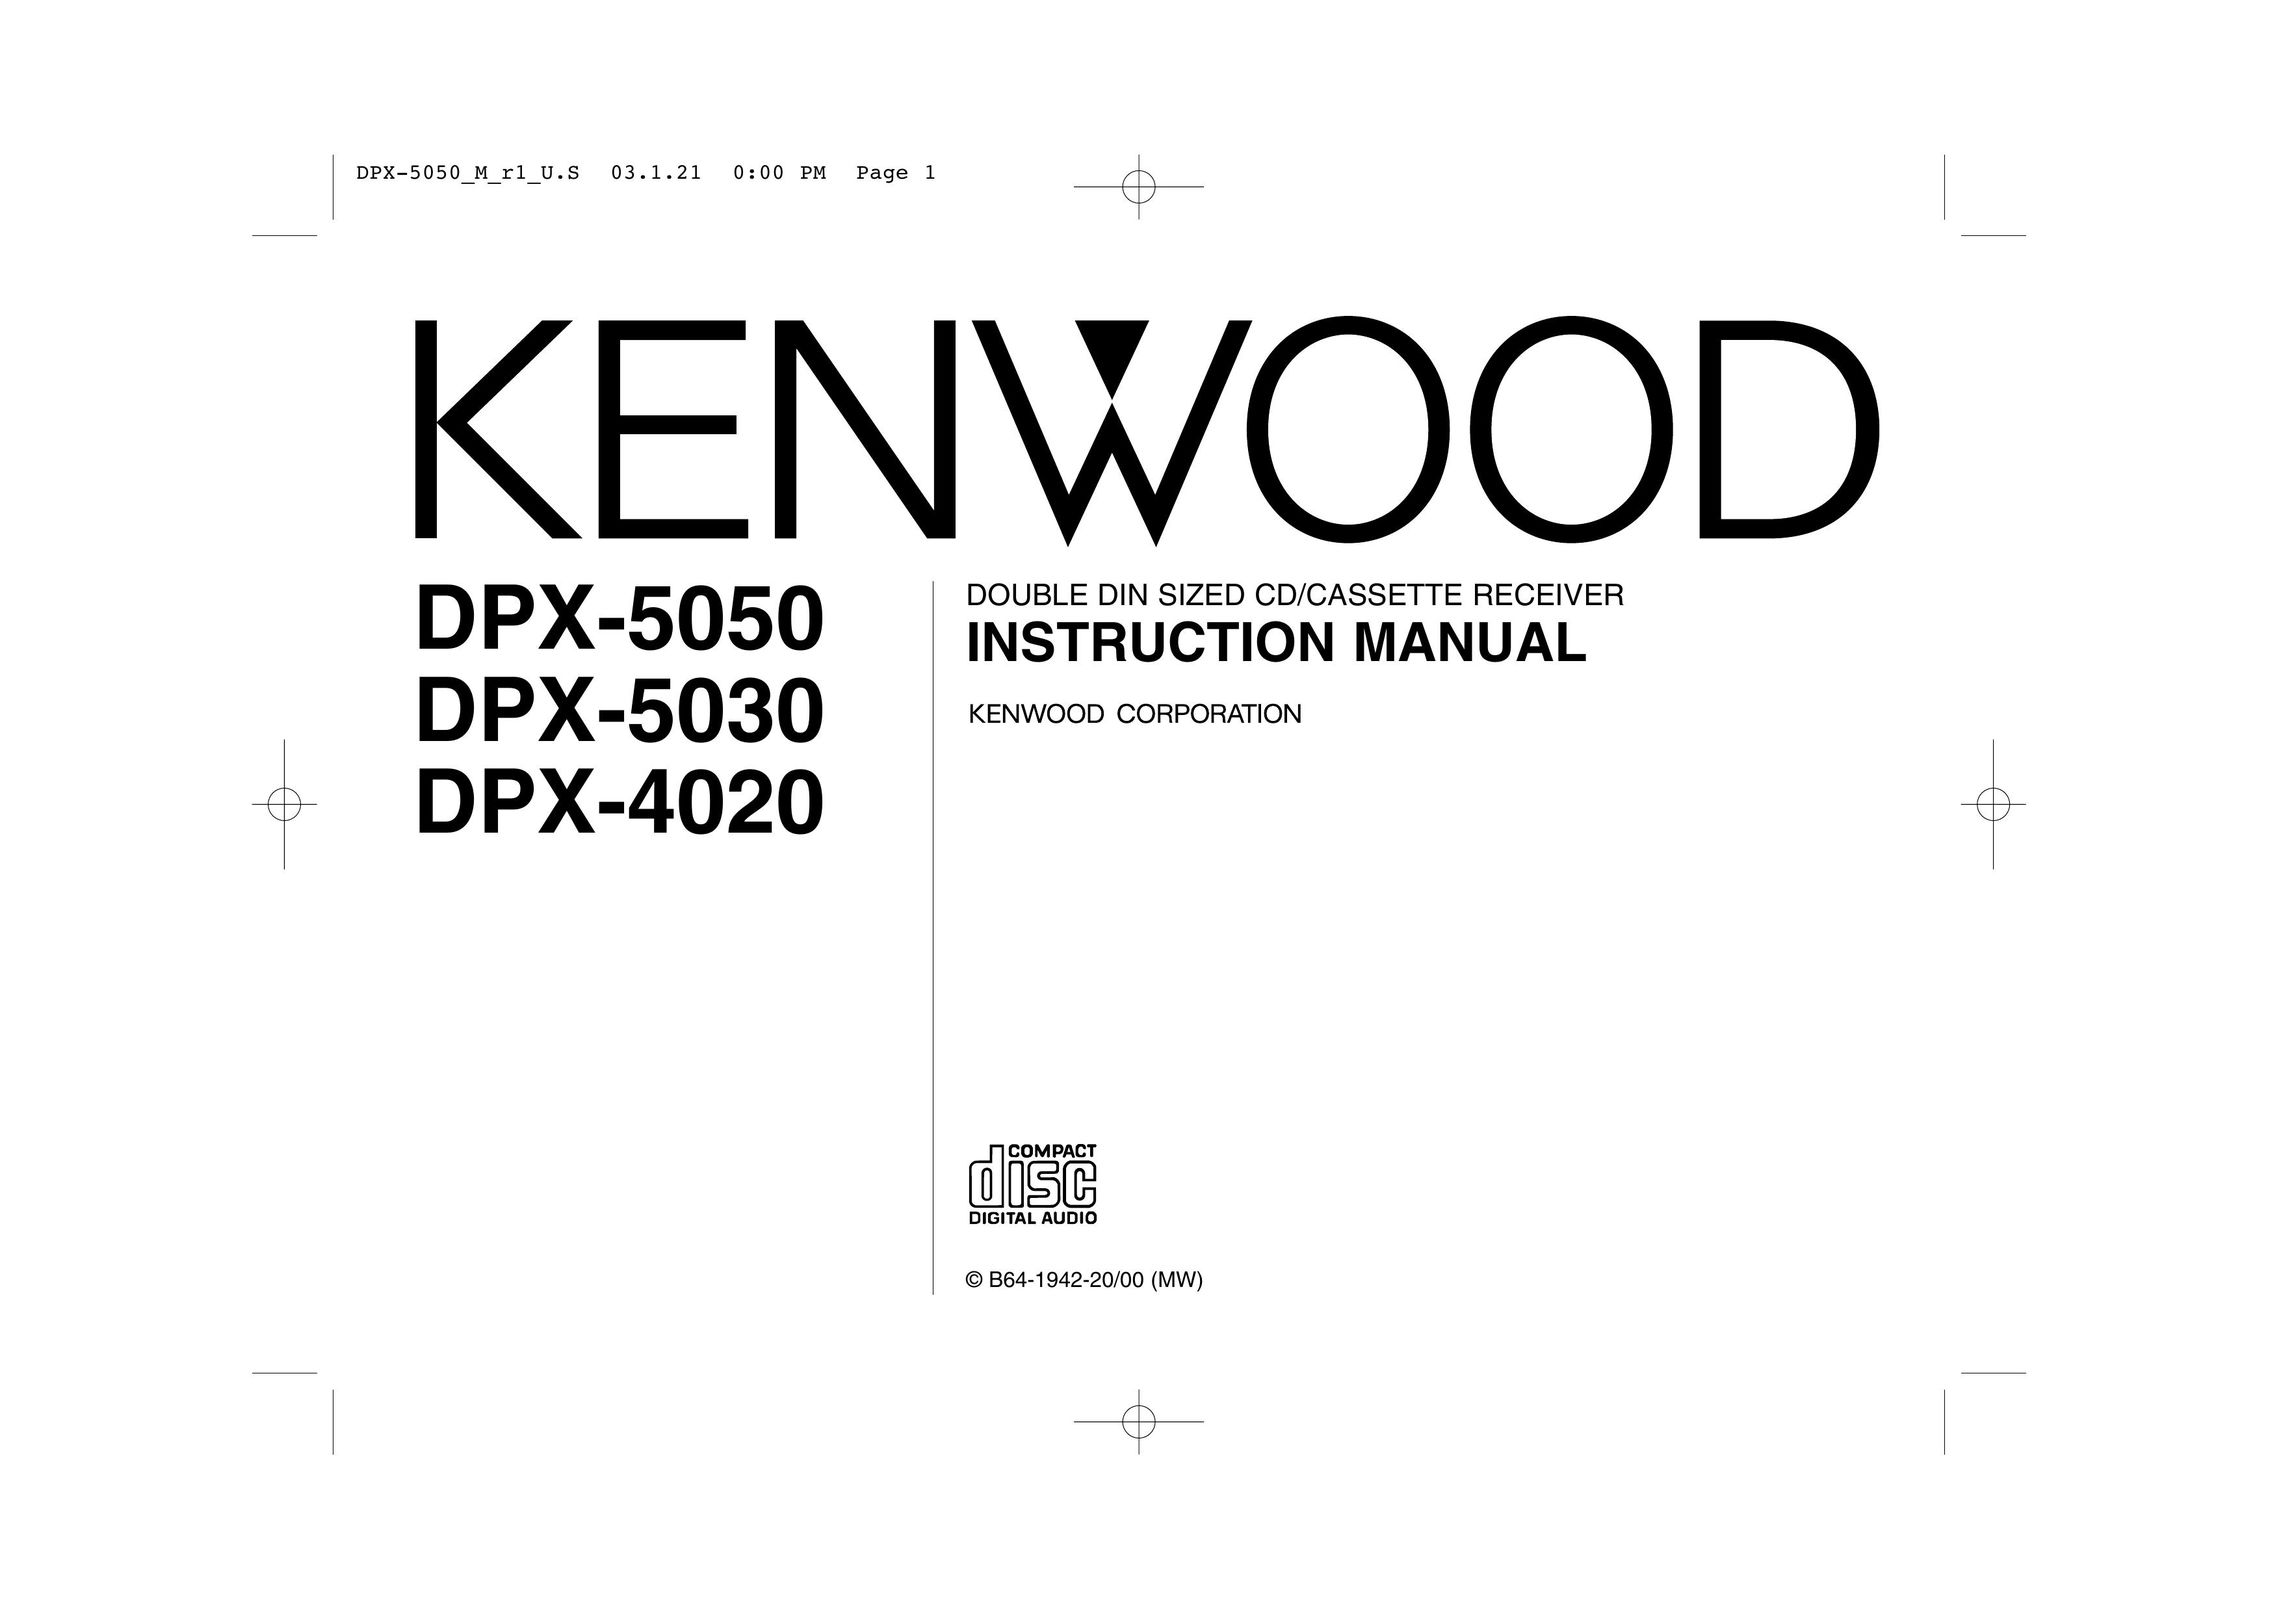 Kenwood DPX-5050 Car Stereo System User Manual